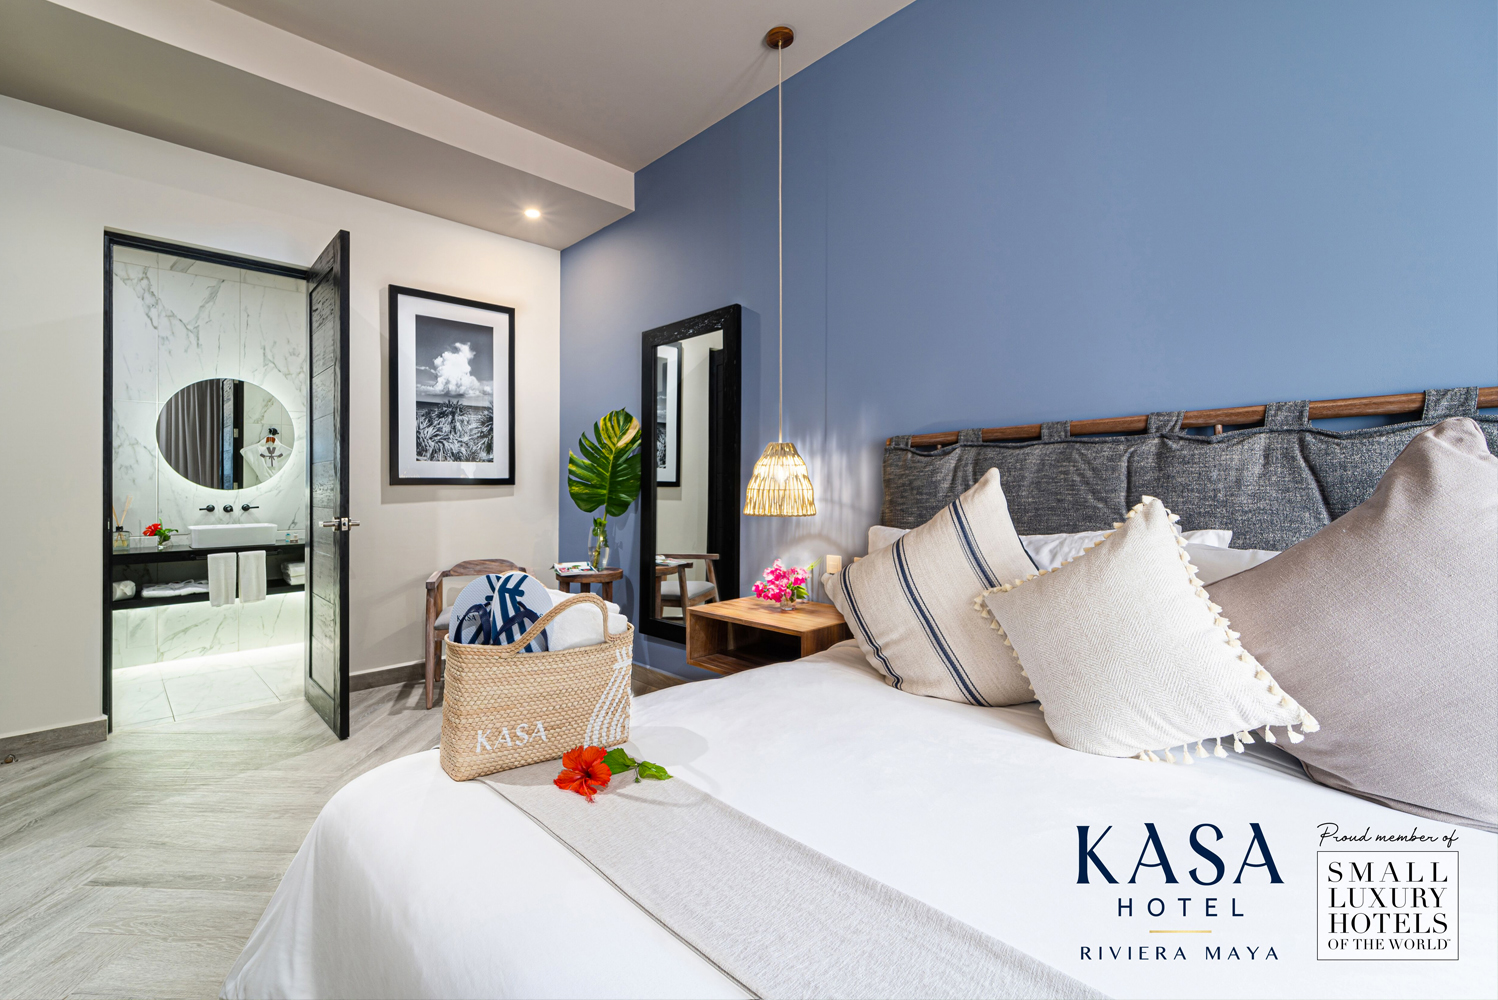 Kasa Hotel Collection is scheduled to open the new Kasa Hotel Riviera Maya this November 1